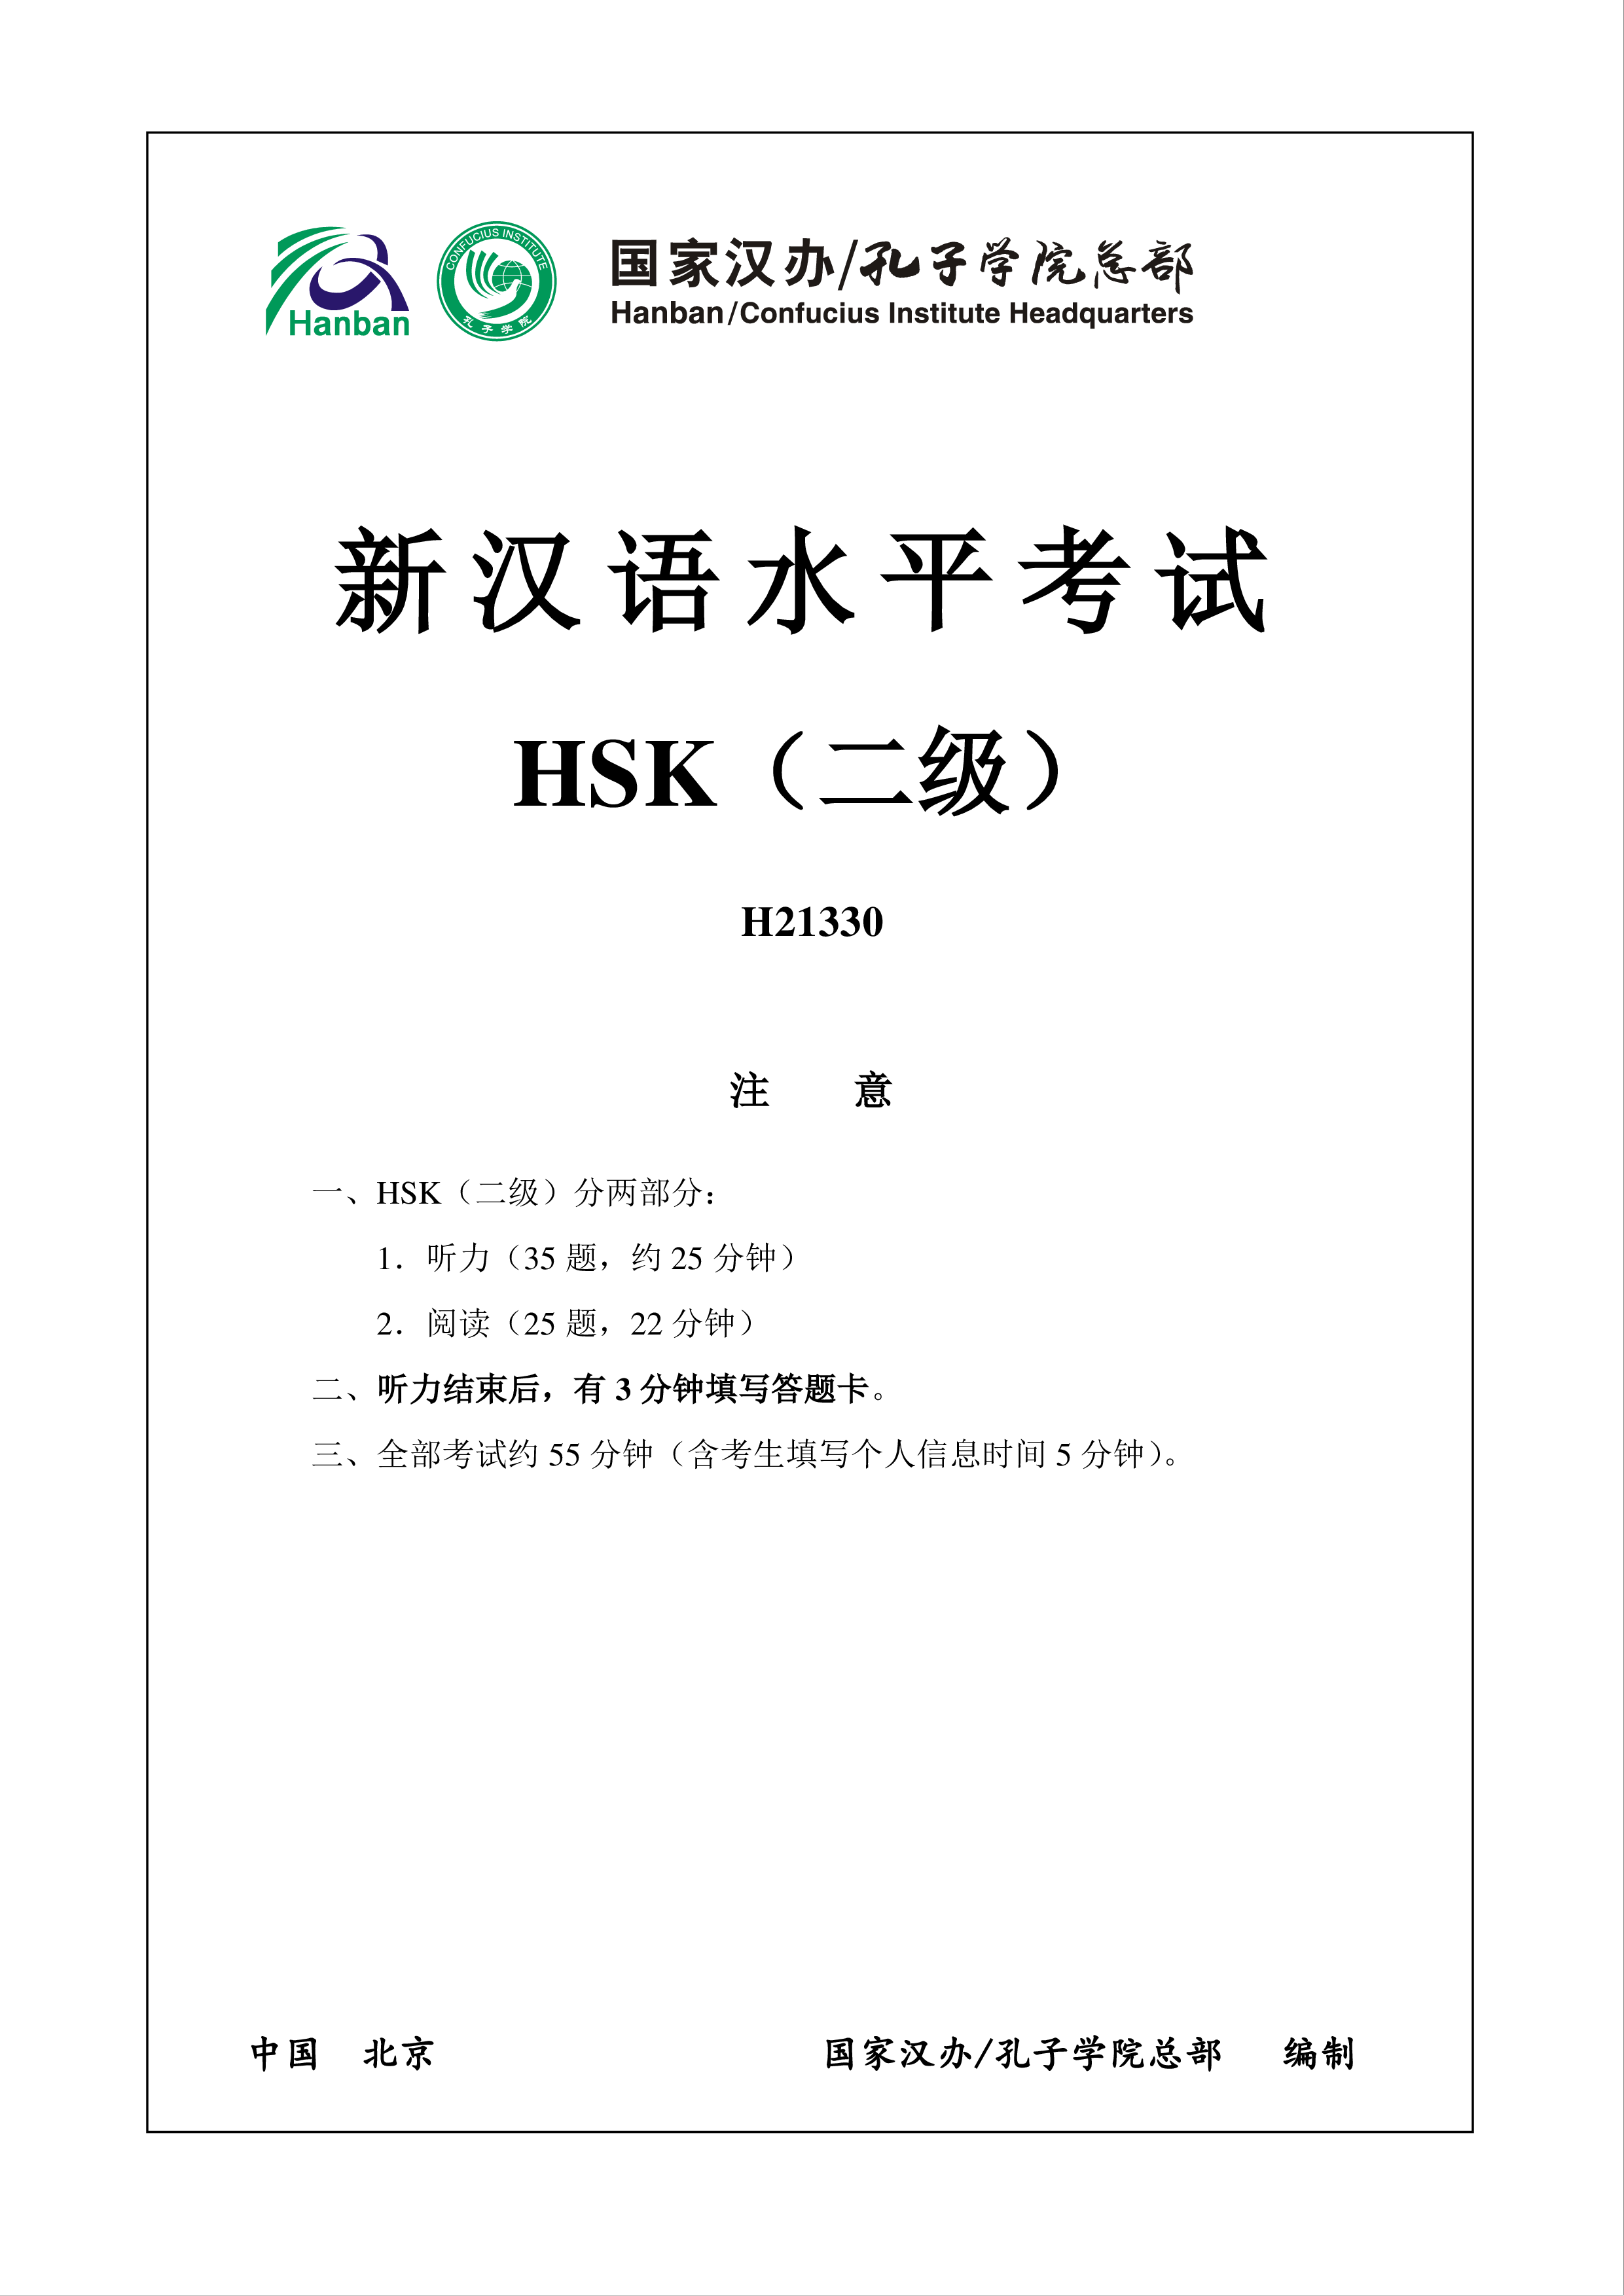 HSK2 H21330 Chinese Exam including Answers, Audio 模板